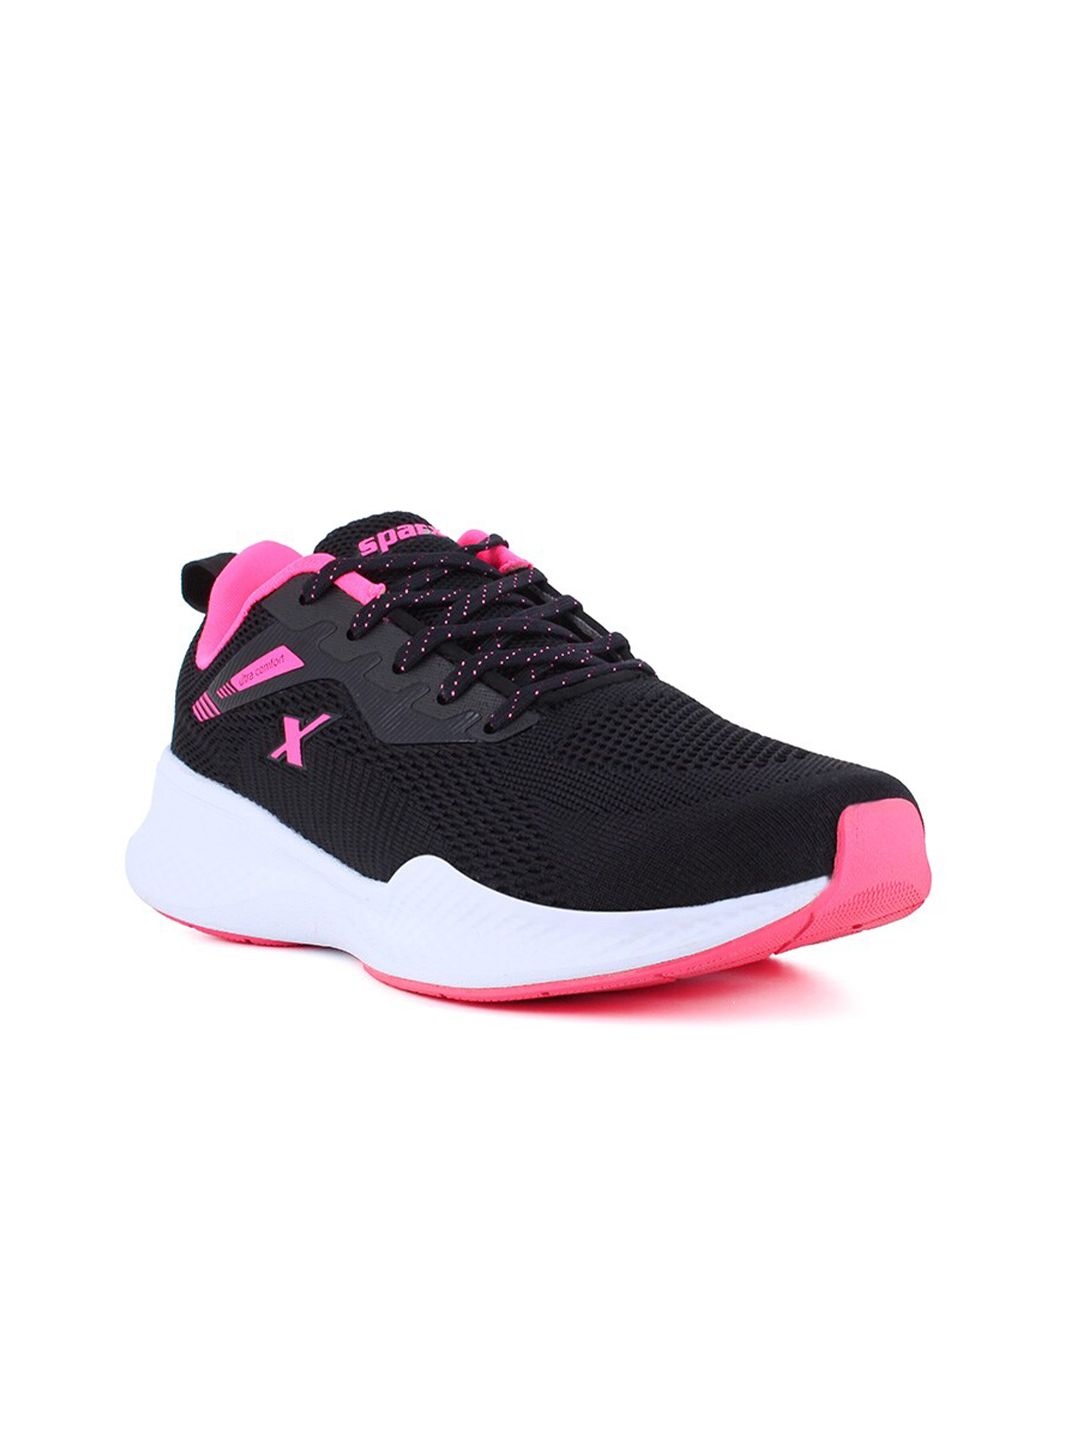 Sparx Women SL-199 Non-Marking Running Shoes Price in India